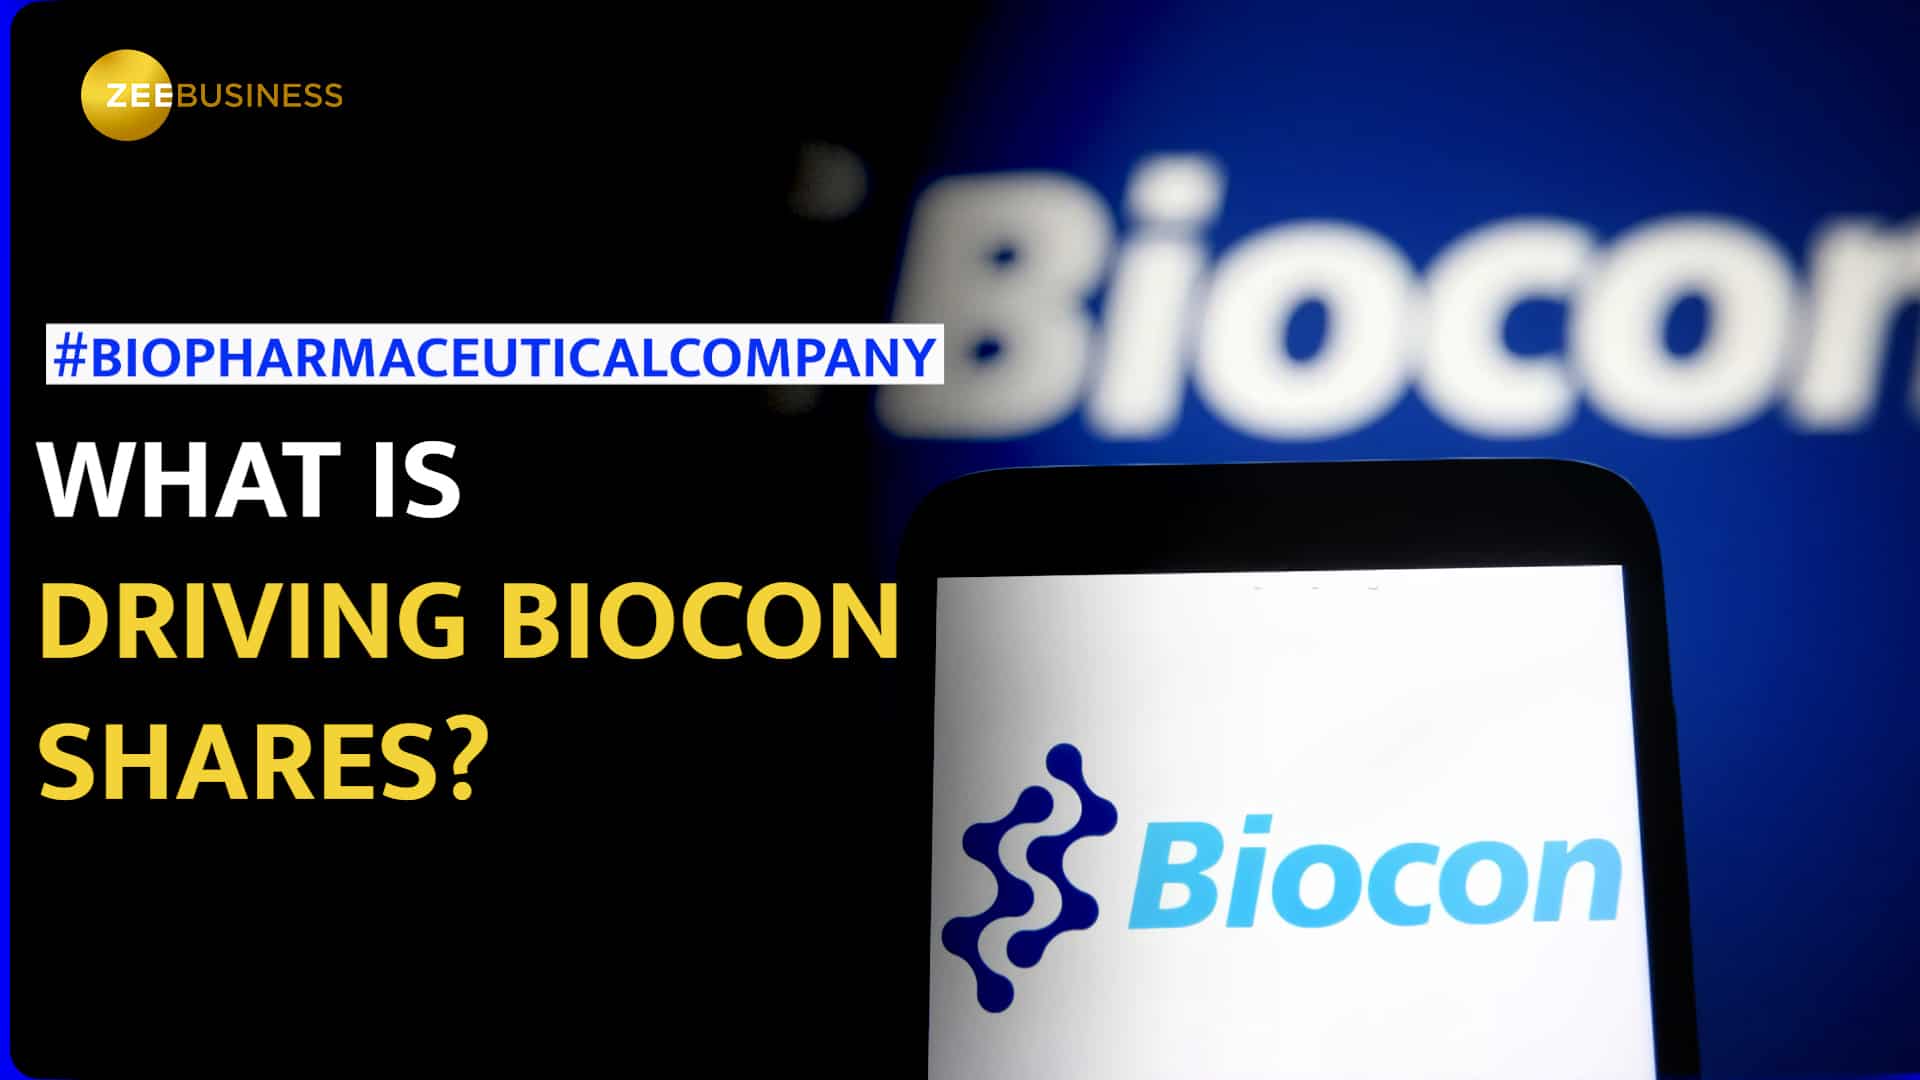 Viatris' Global Biosimilars Business is now fully acquired by Biocon  Biologics